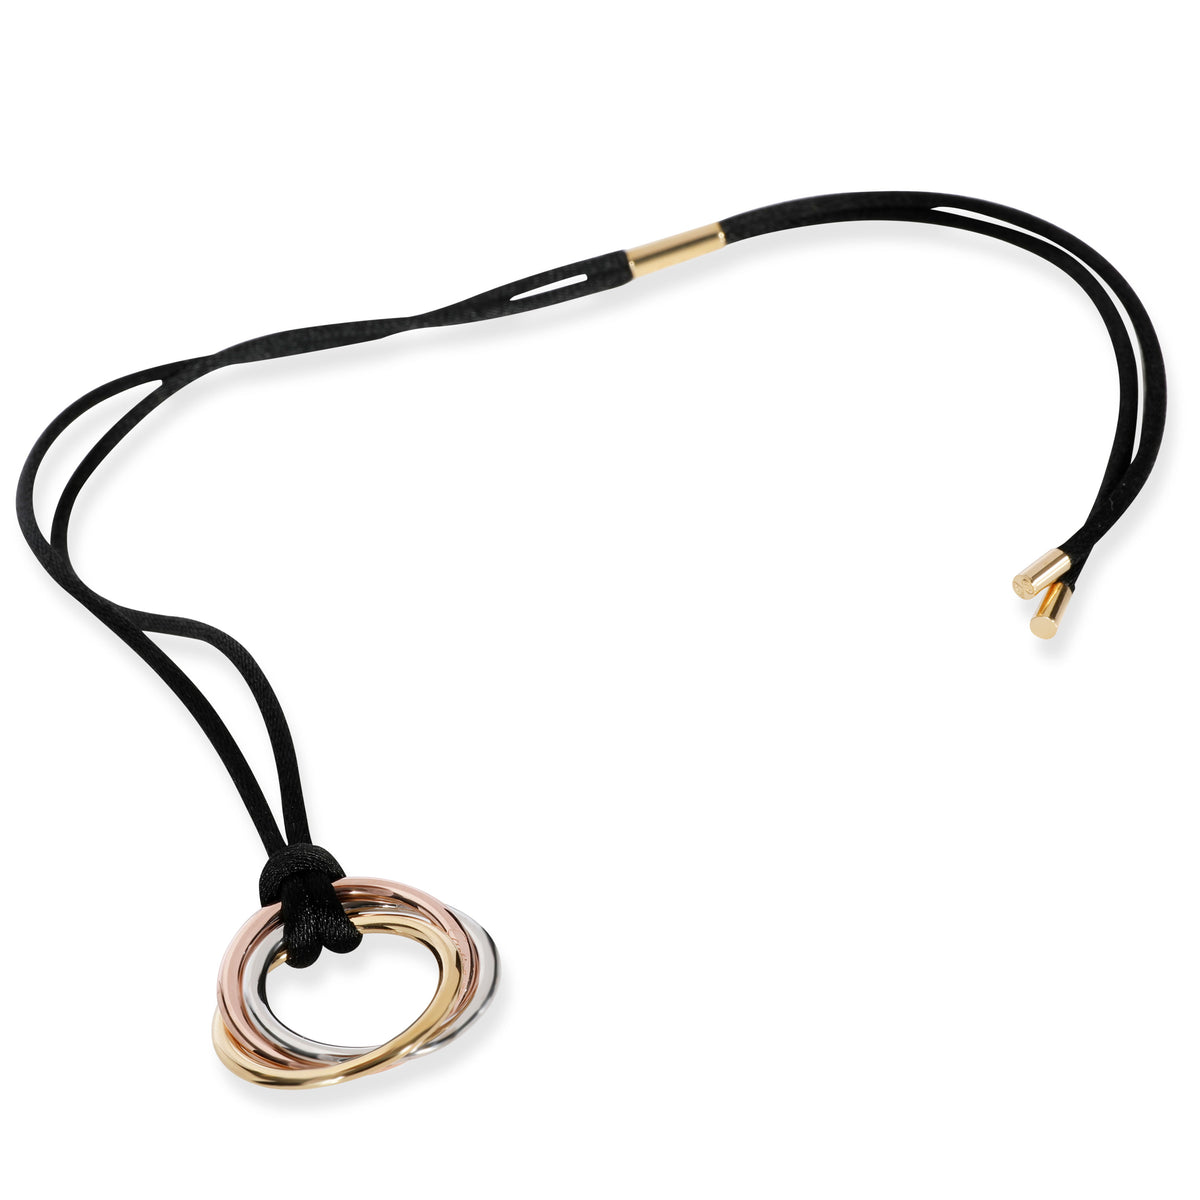 Cartier Trinity Cord Necklace in 18K 3 Tone Gold